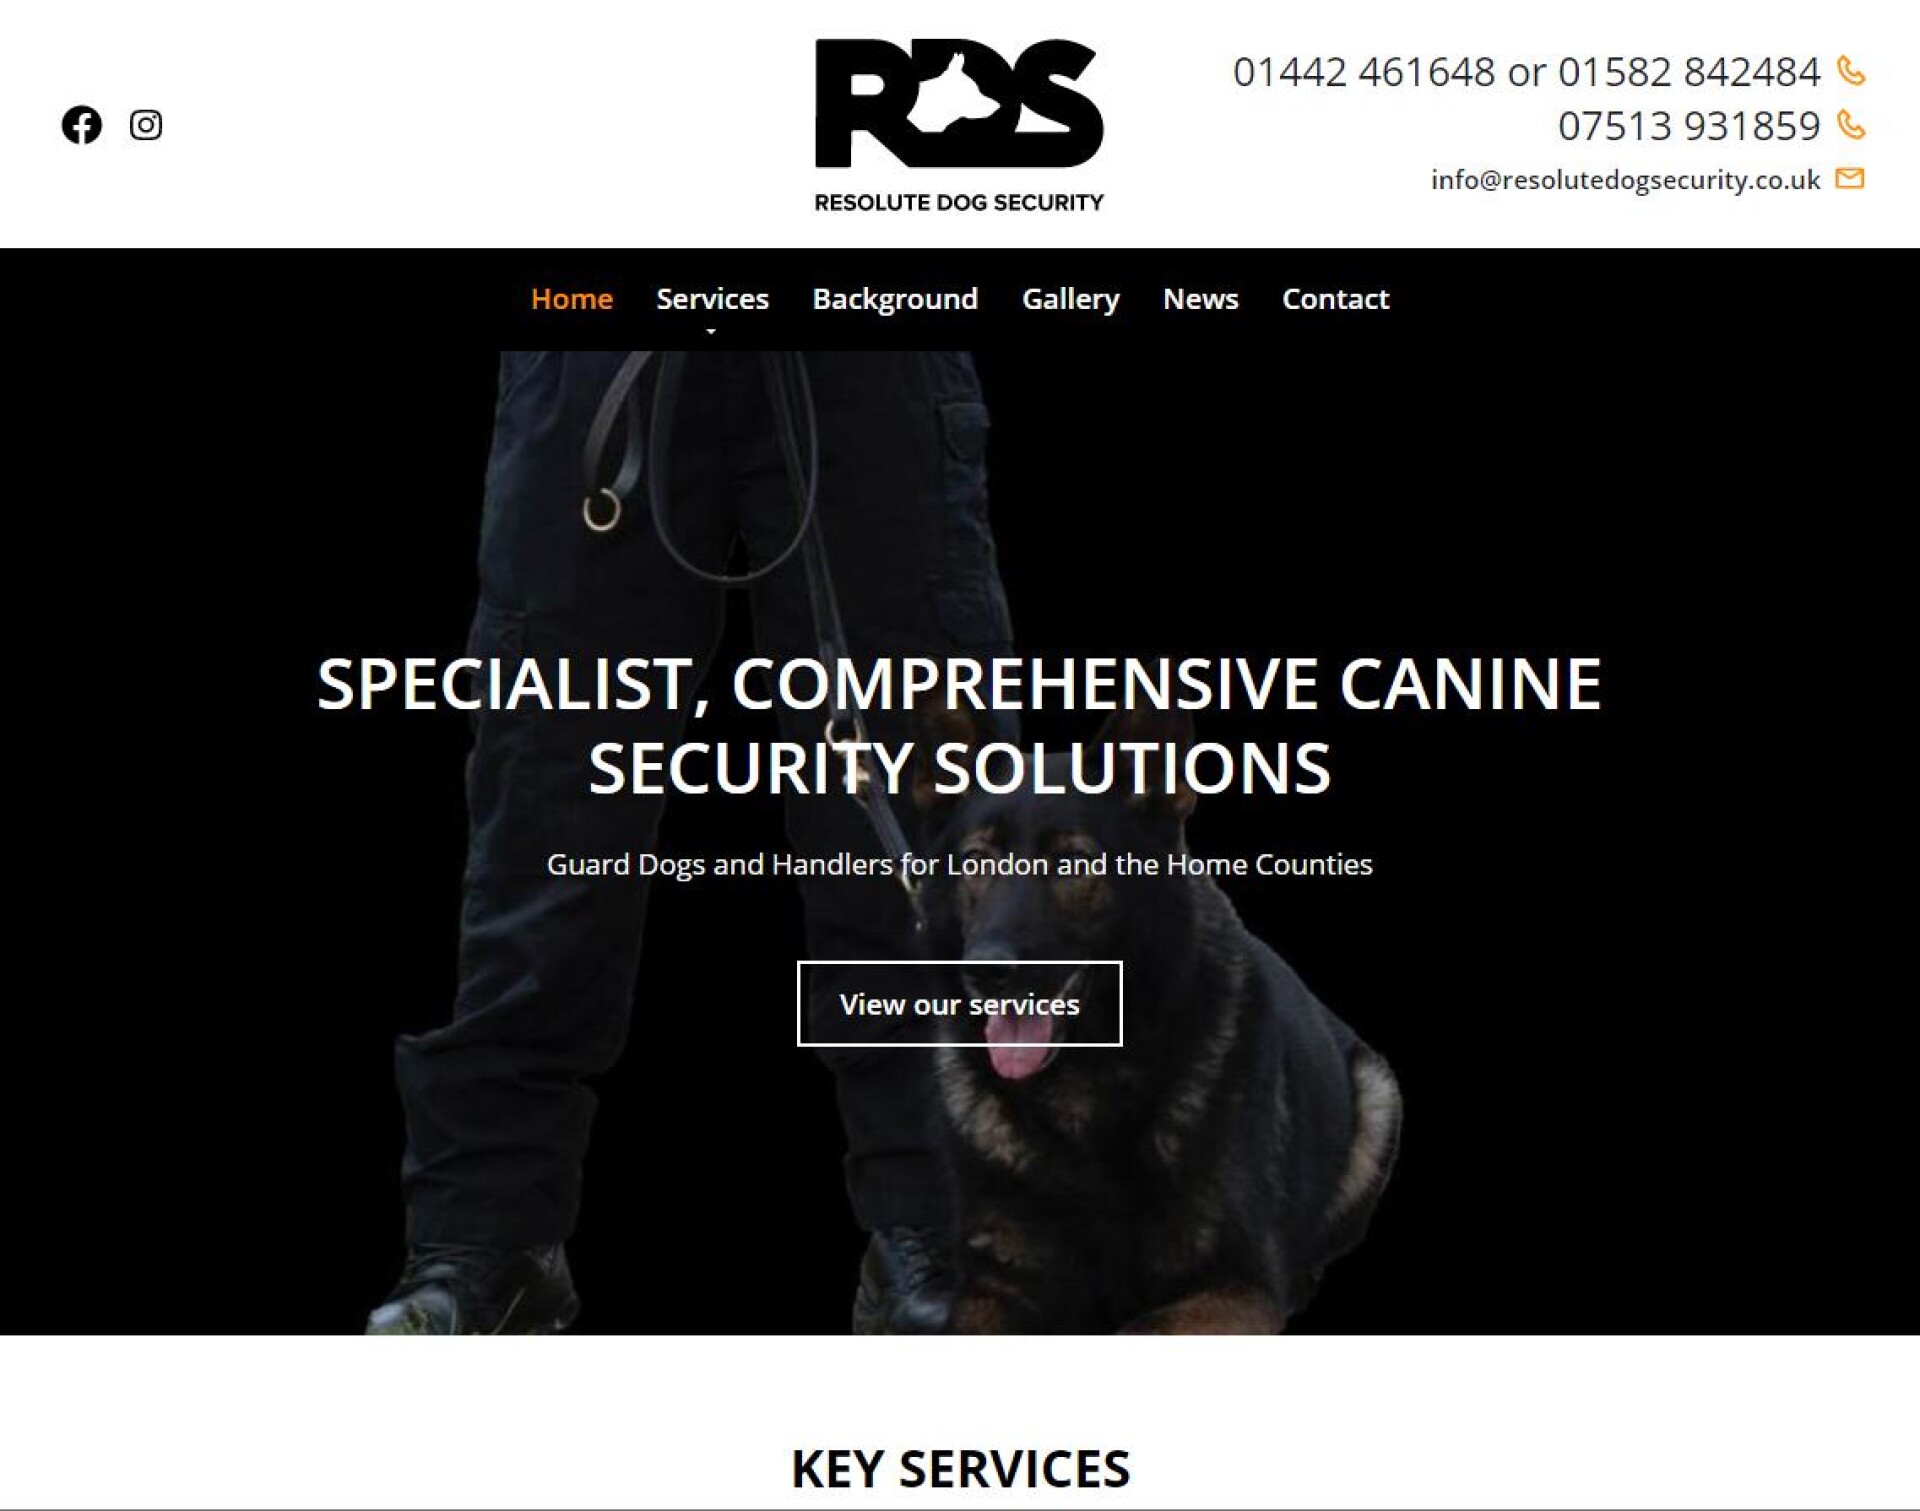 New Resolute Dog Security website